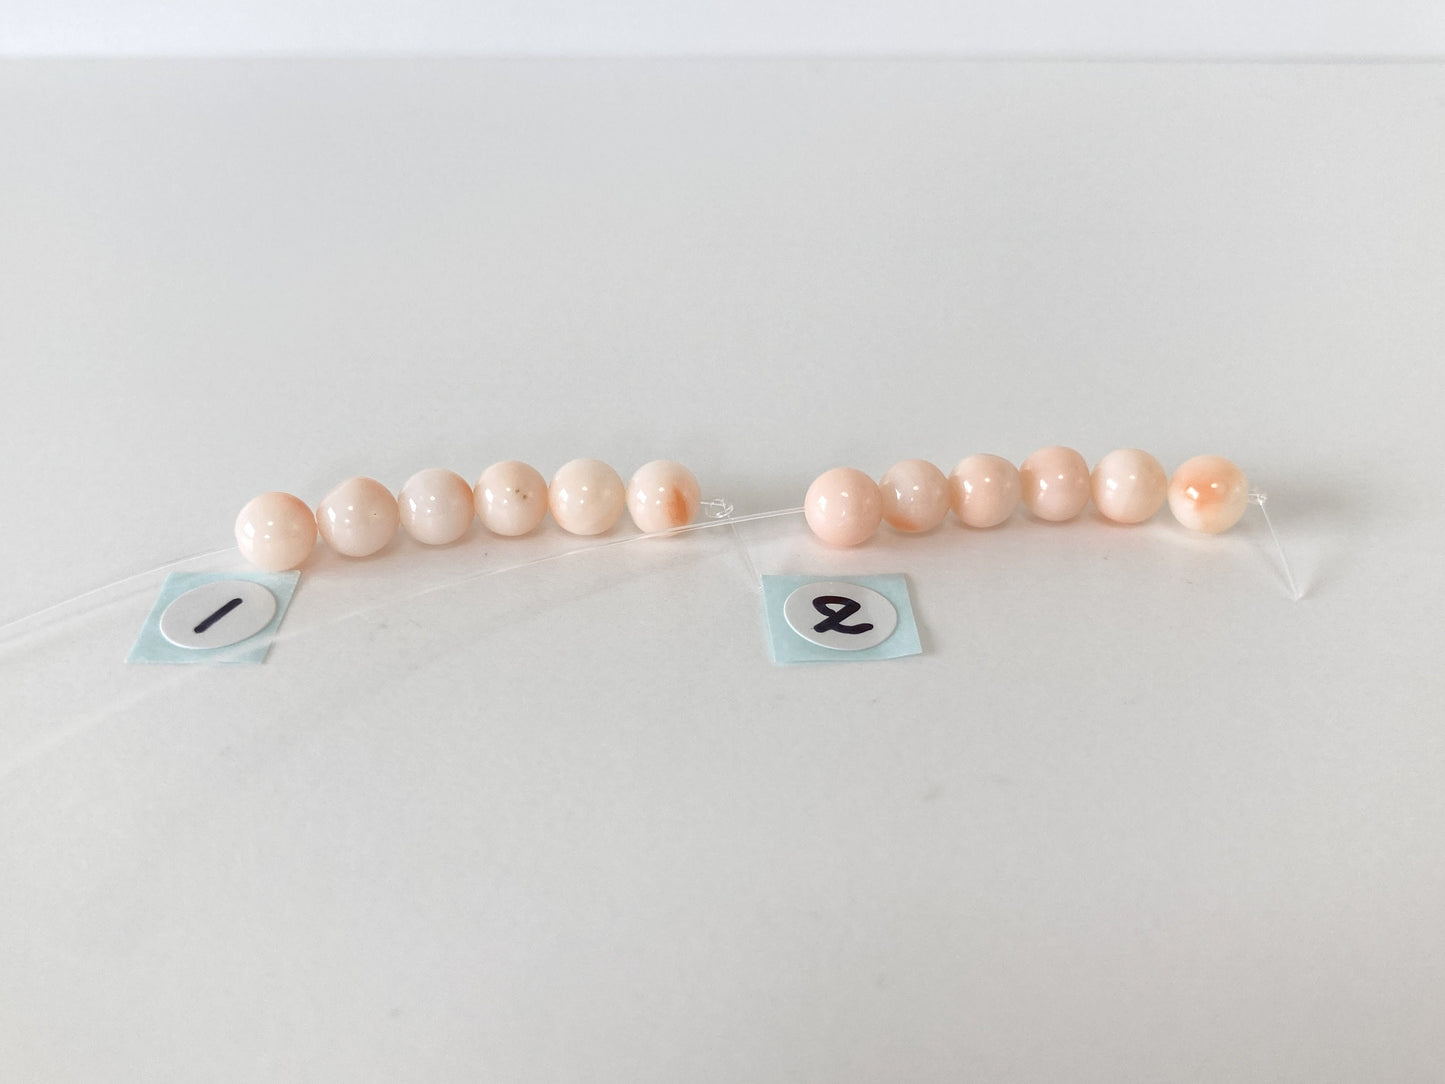 Reserved for Loes, #2 Short strand (6pcs) of Natural Deep sea coral round beads strand 5.5-6mm, natural Pink/White/Orange Color coral